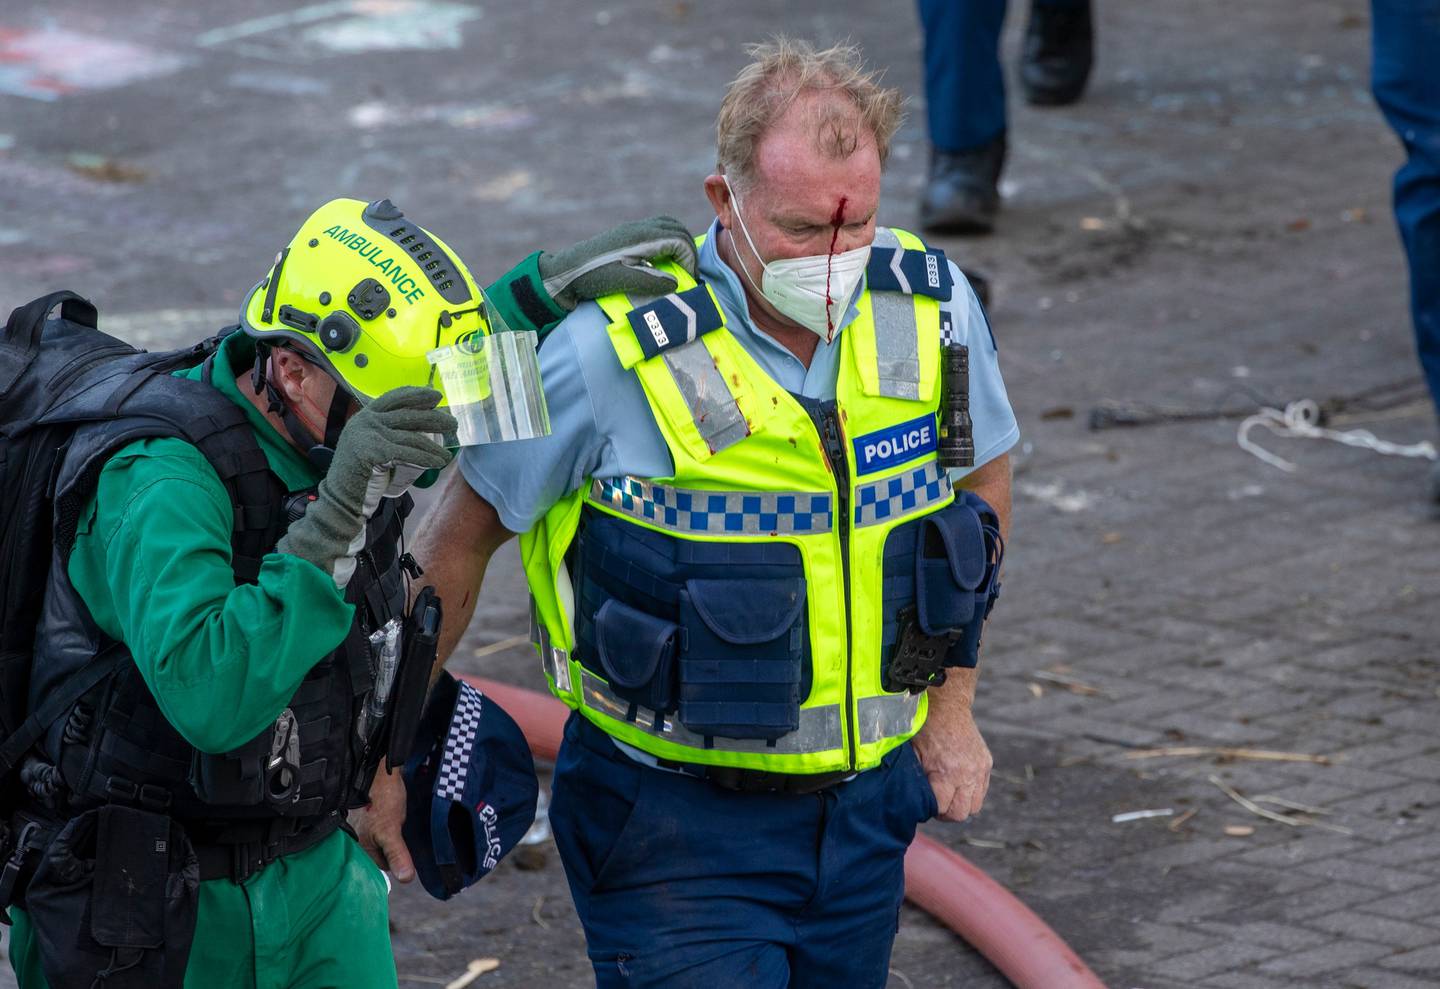 An injured officer is assisted by paramedics. Around 40 police officers were injured that day....